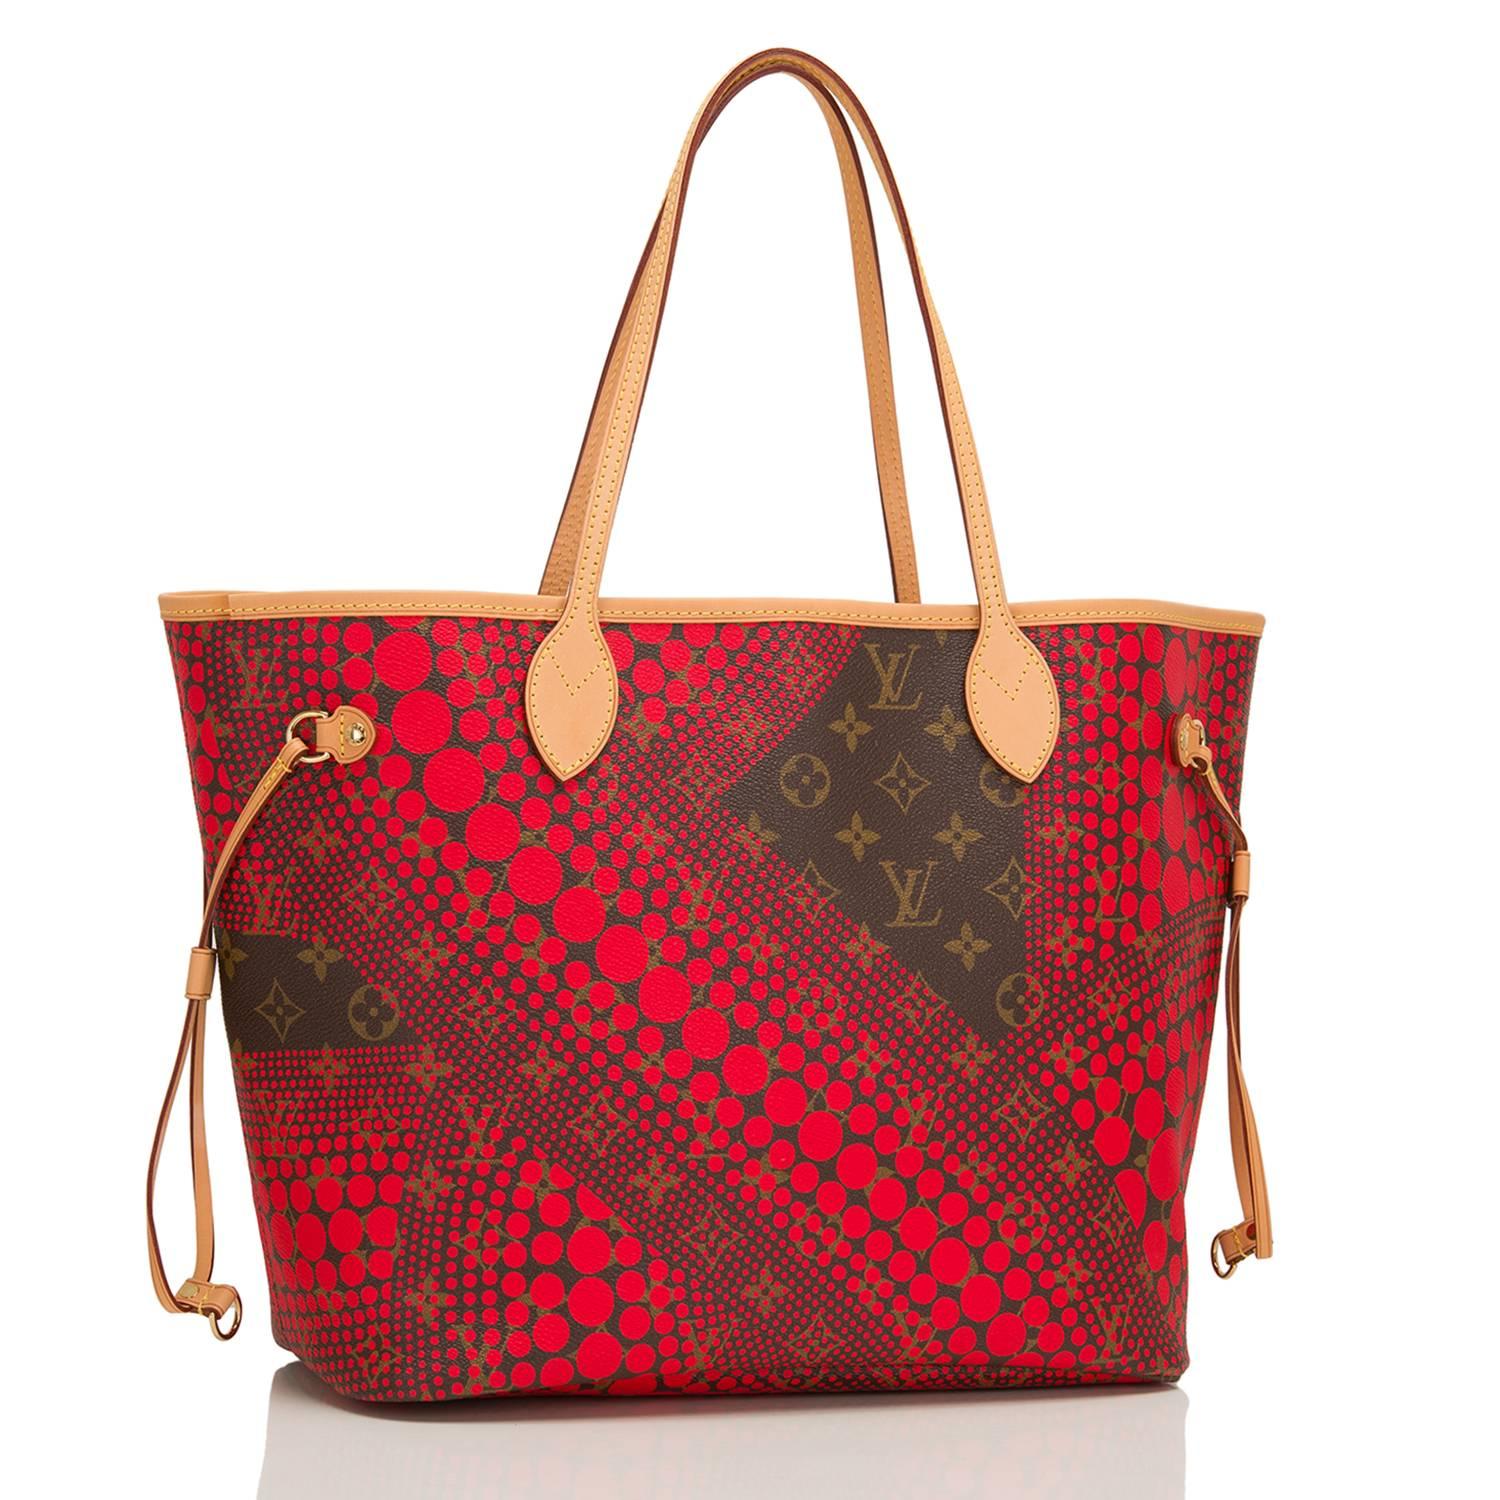 Louis Vuitton Red Monogram Waves Neverfull MM tote designed by Yayoi Kusama of coated canvas.

This limited edition Neverfull has polished brass hardware, yellow contrast stitching, a removable luggage tag, a hidden top hook closure, double flat